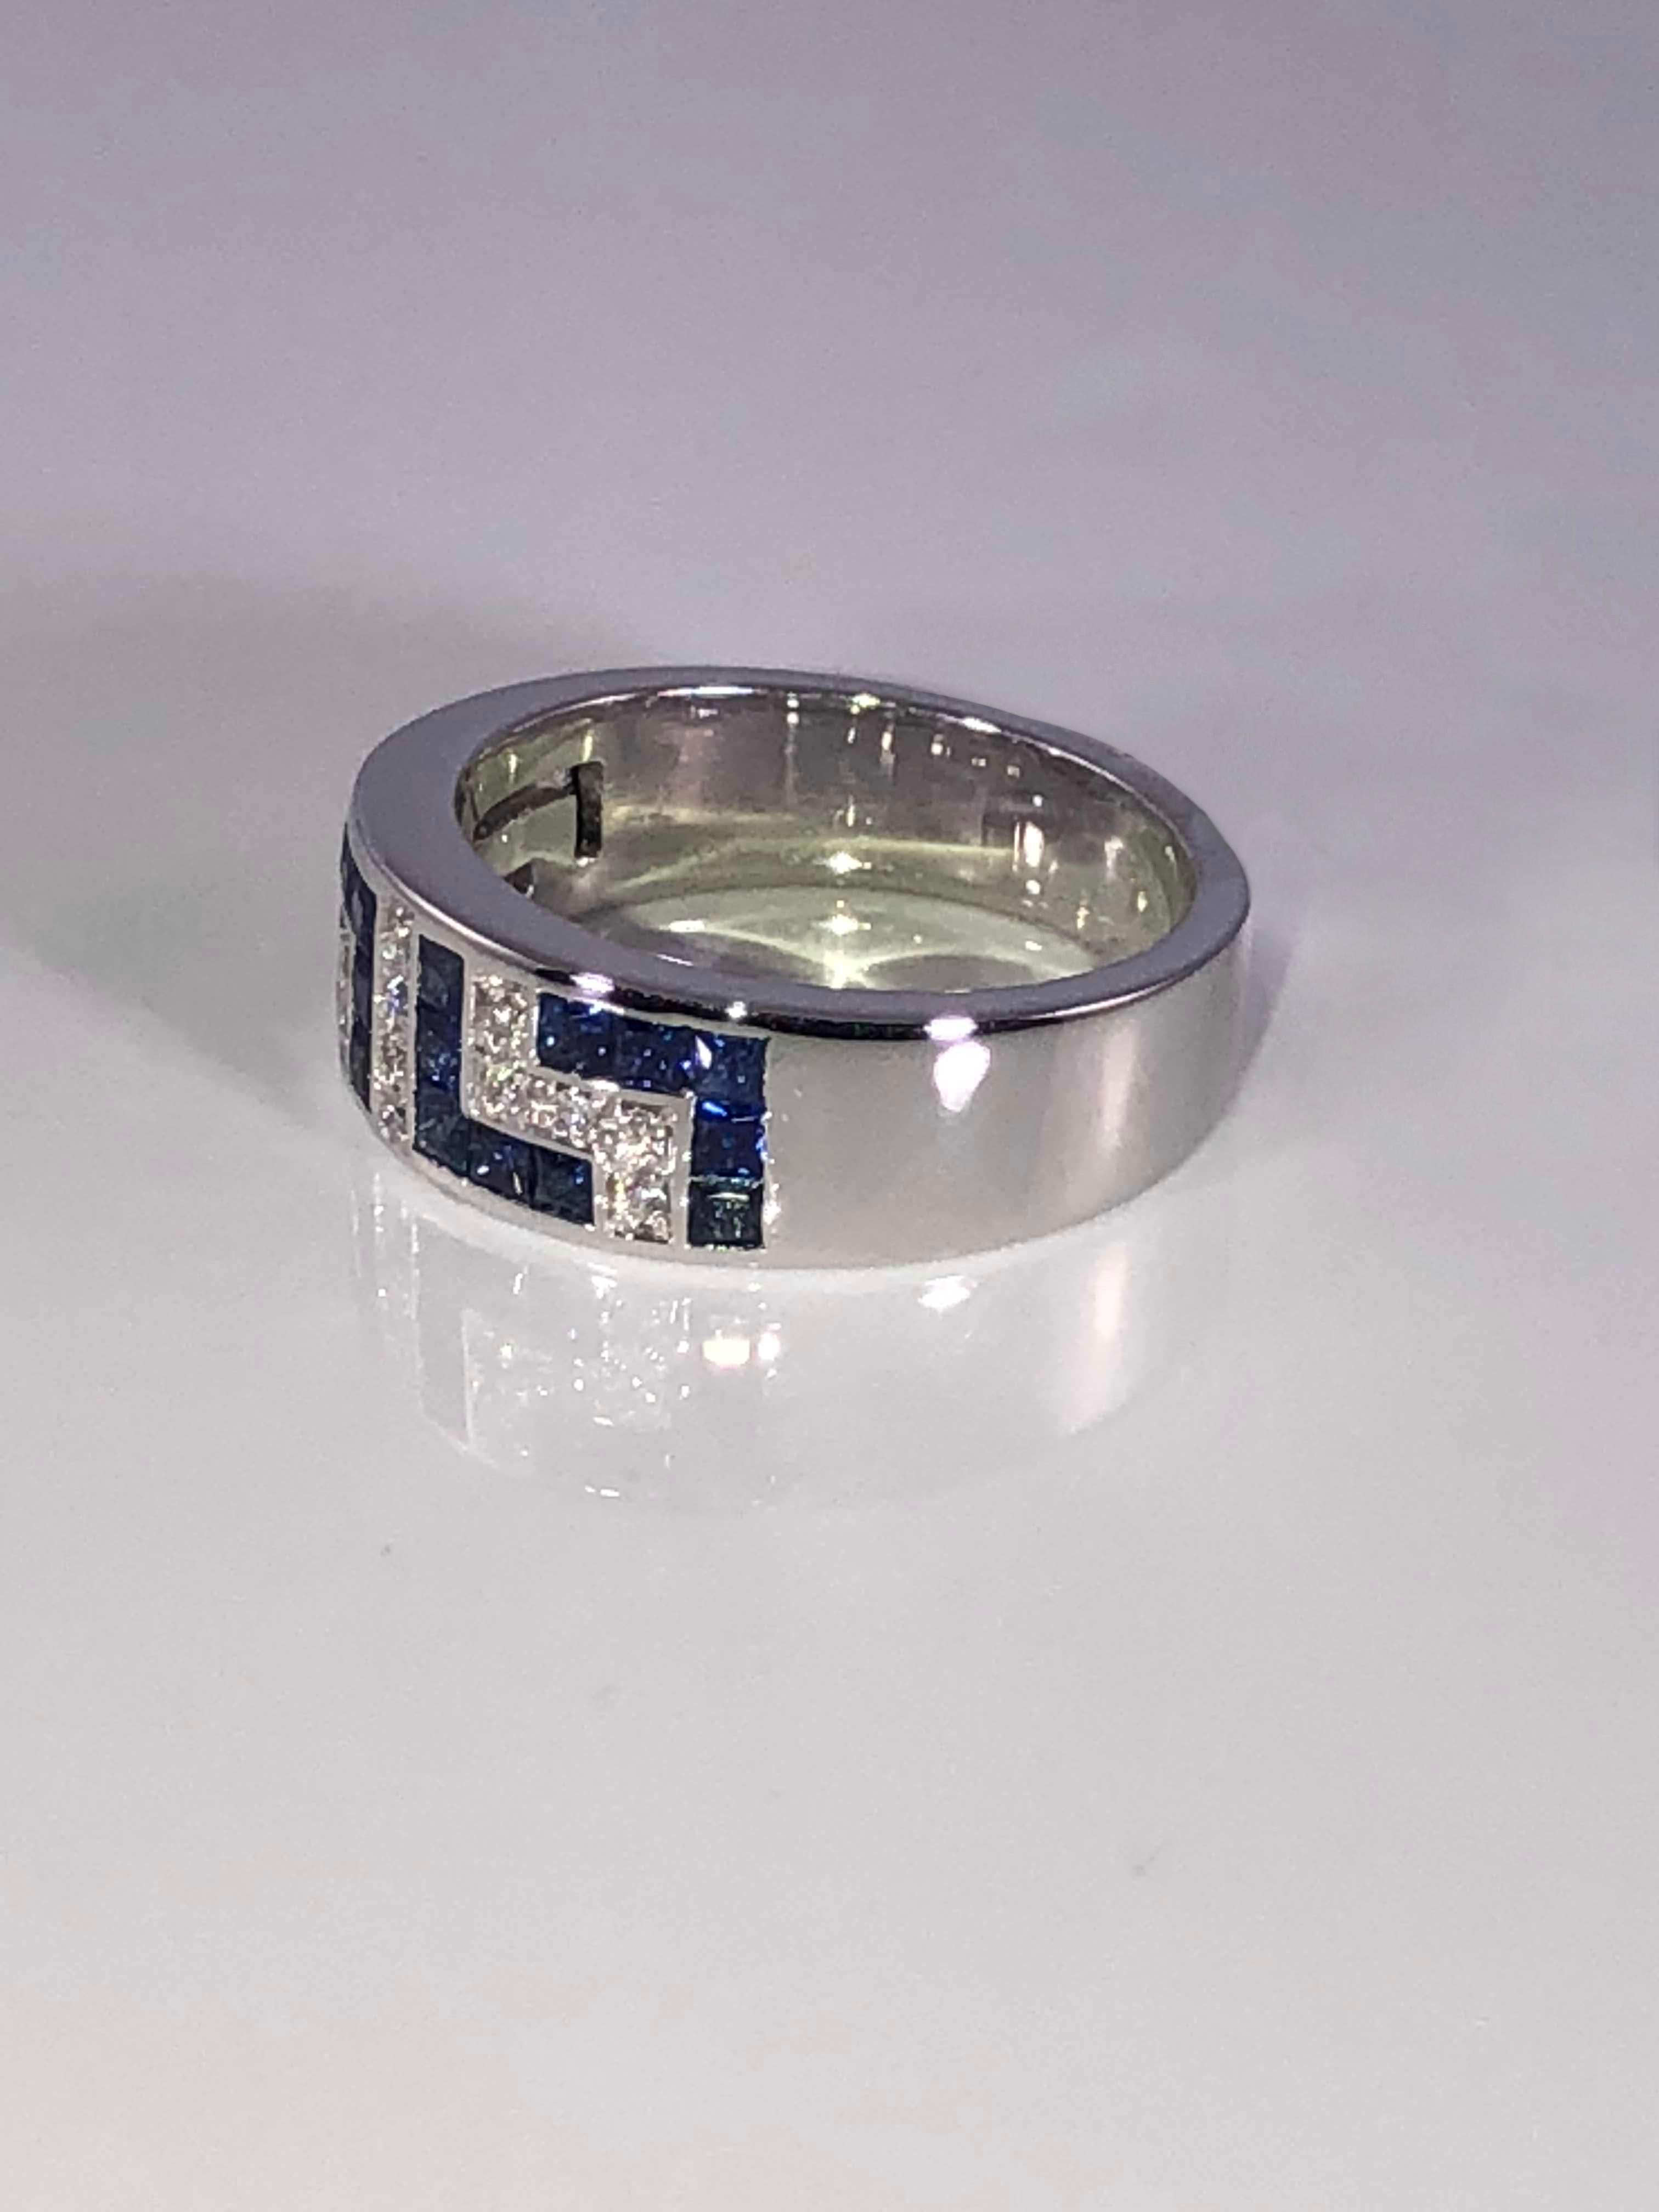 S.Georgios designer 18 Karat White Gold Ring featuring the Greek Key design symbolizing eternity all custom-made. It is decorated with Brilliant Cut White Diamonds total weight of 0.16 Carat, and Princess cut Blue Sapphires total weight of 0.90